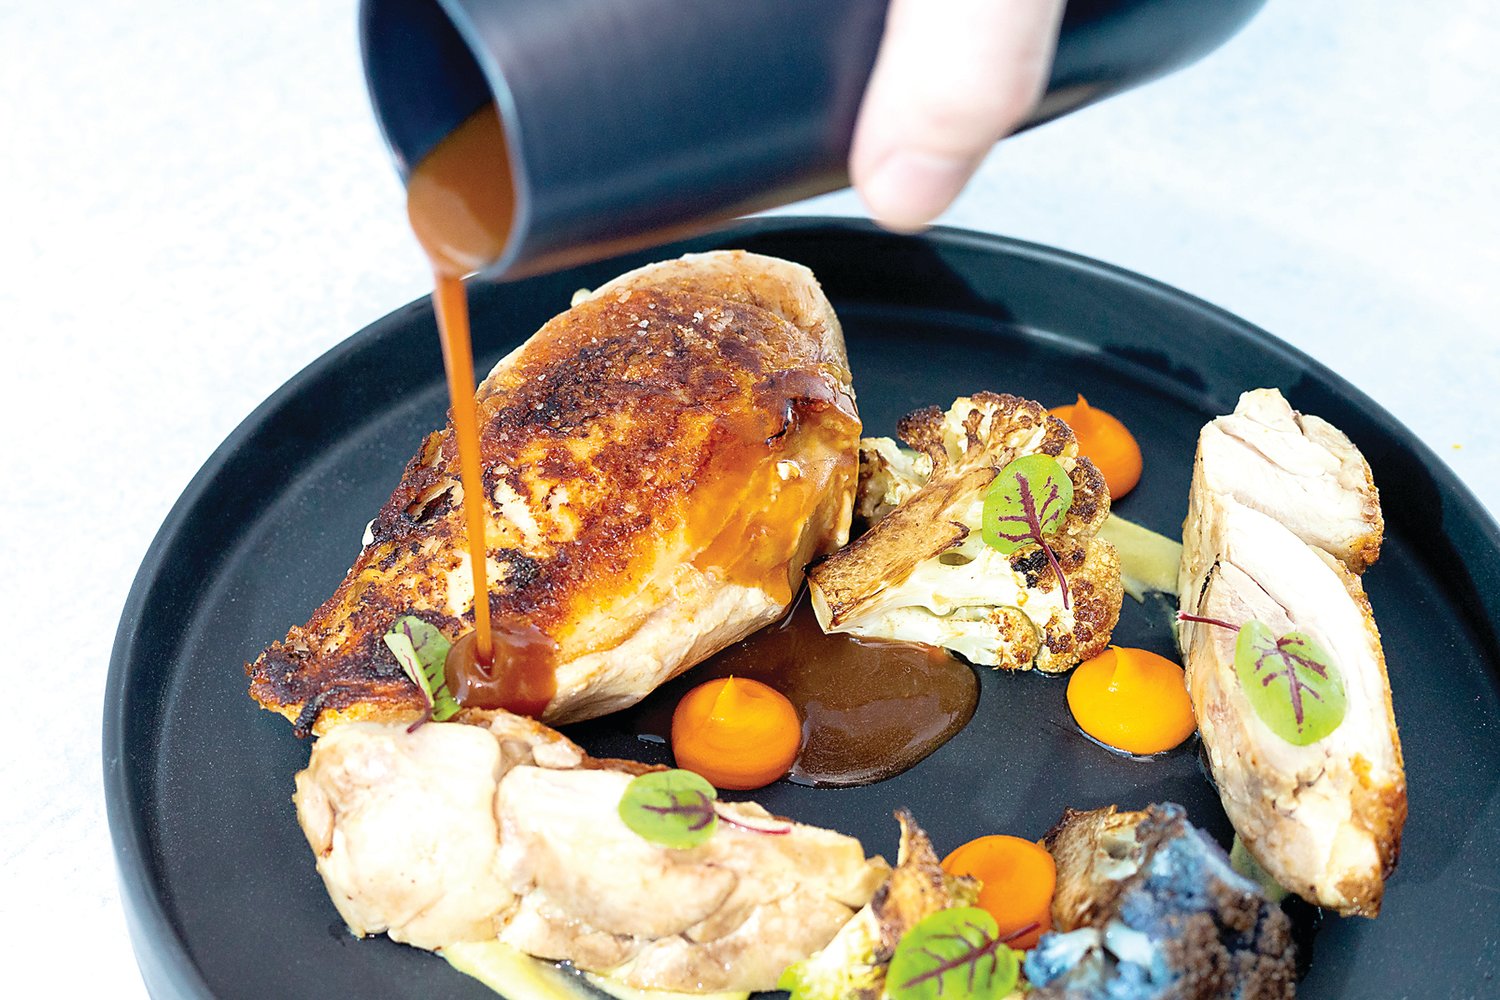 Sherry chicken jus is poured over an order of roasted chicken at Solstice, Newtown’s newest upscale dining venue. Photograph by Solstice.